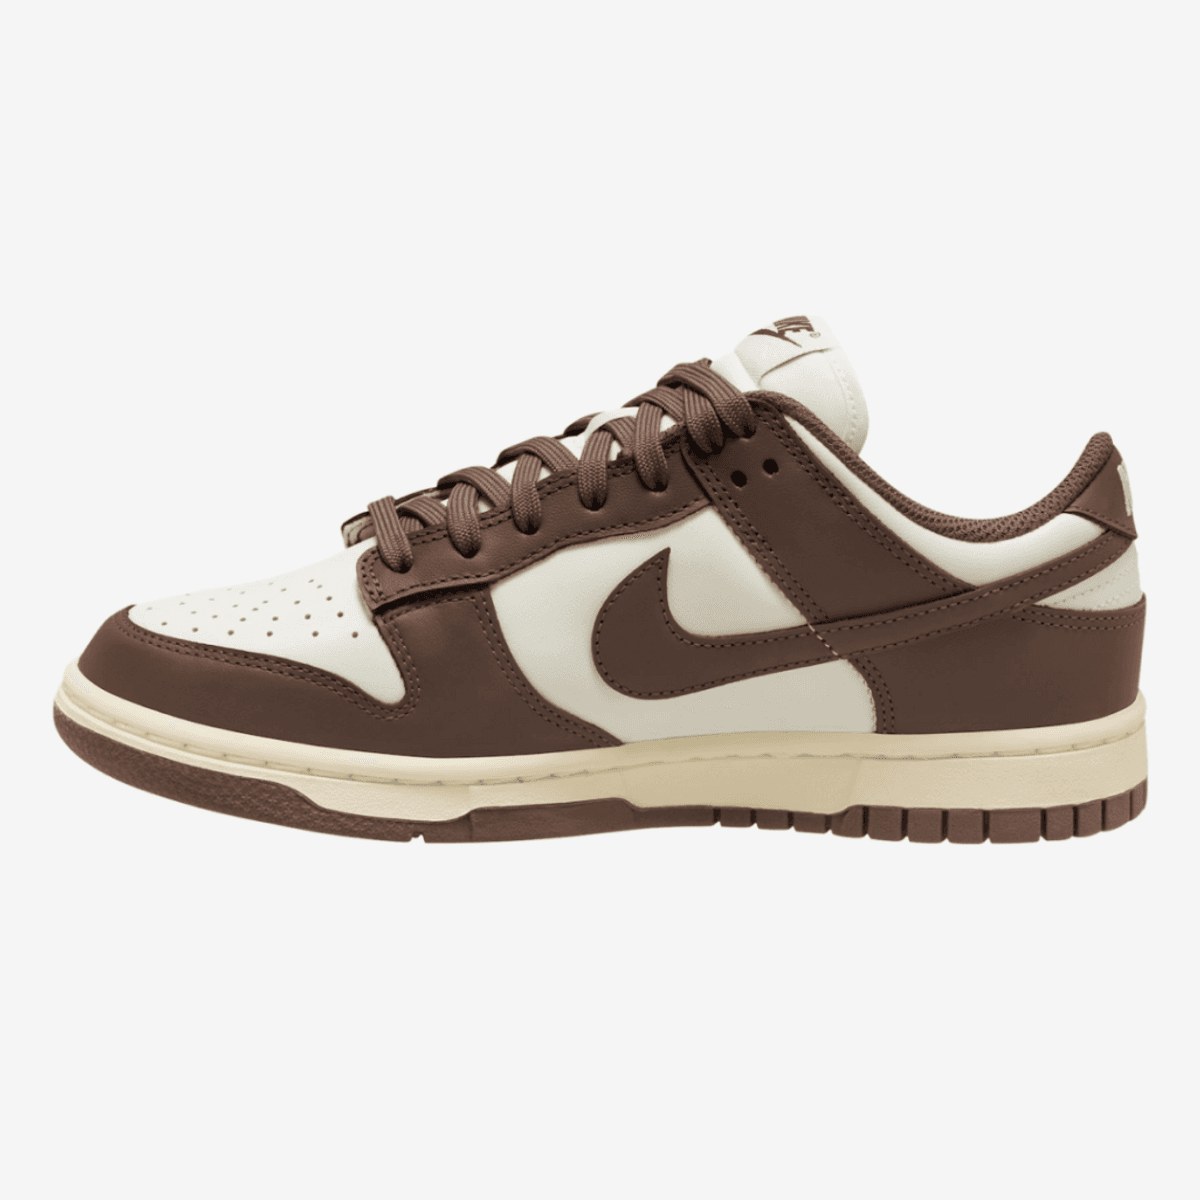 The Nike Dunk Low Mocha Is The Perfect Fusion of Classic Style and Modern Edge